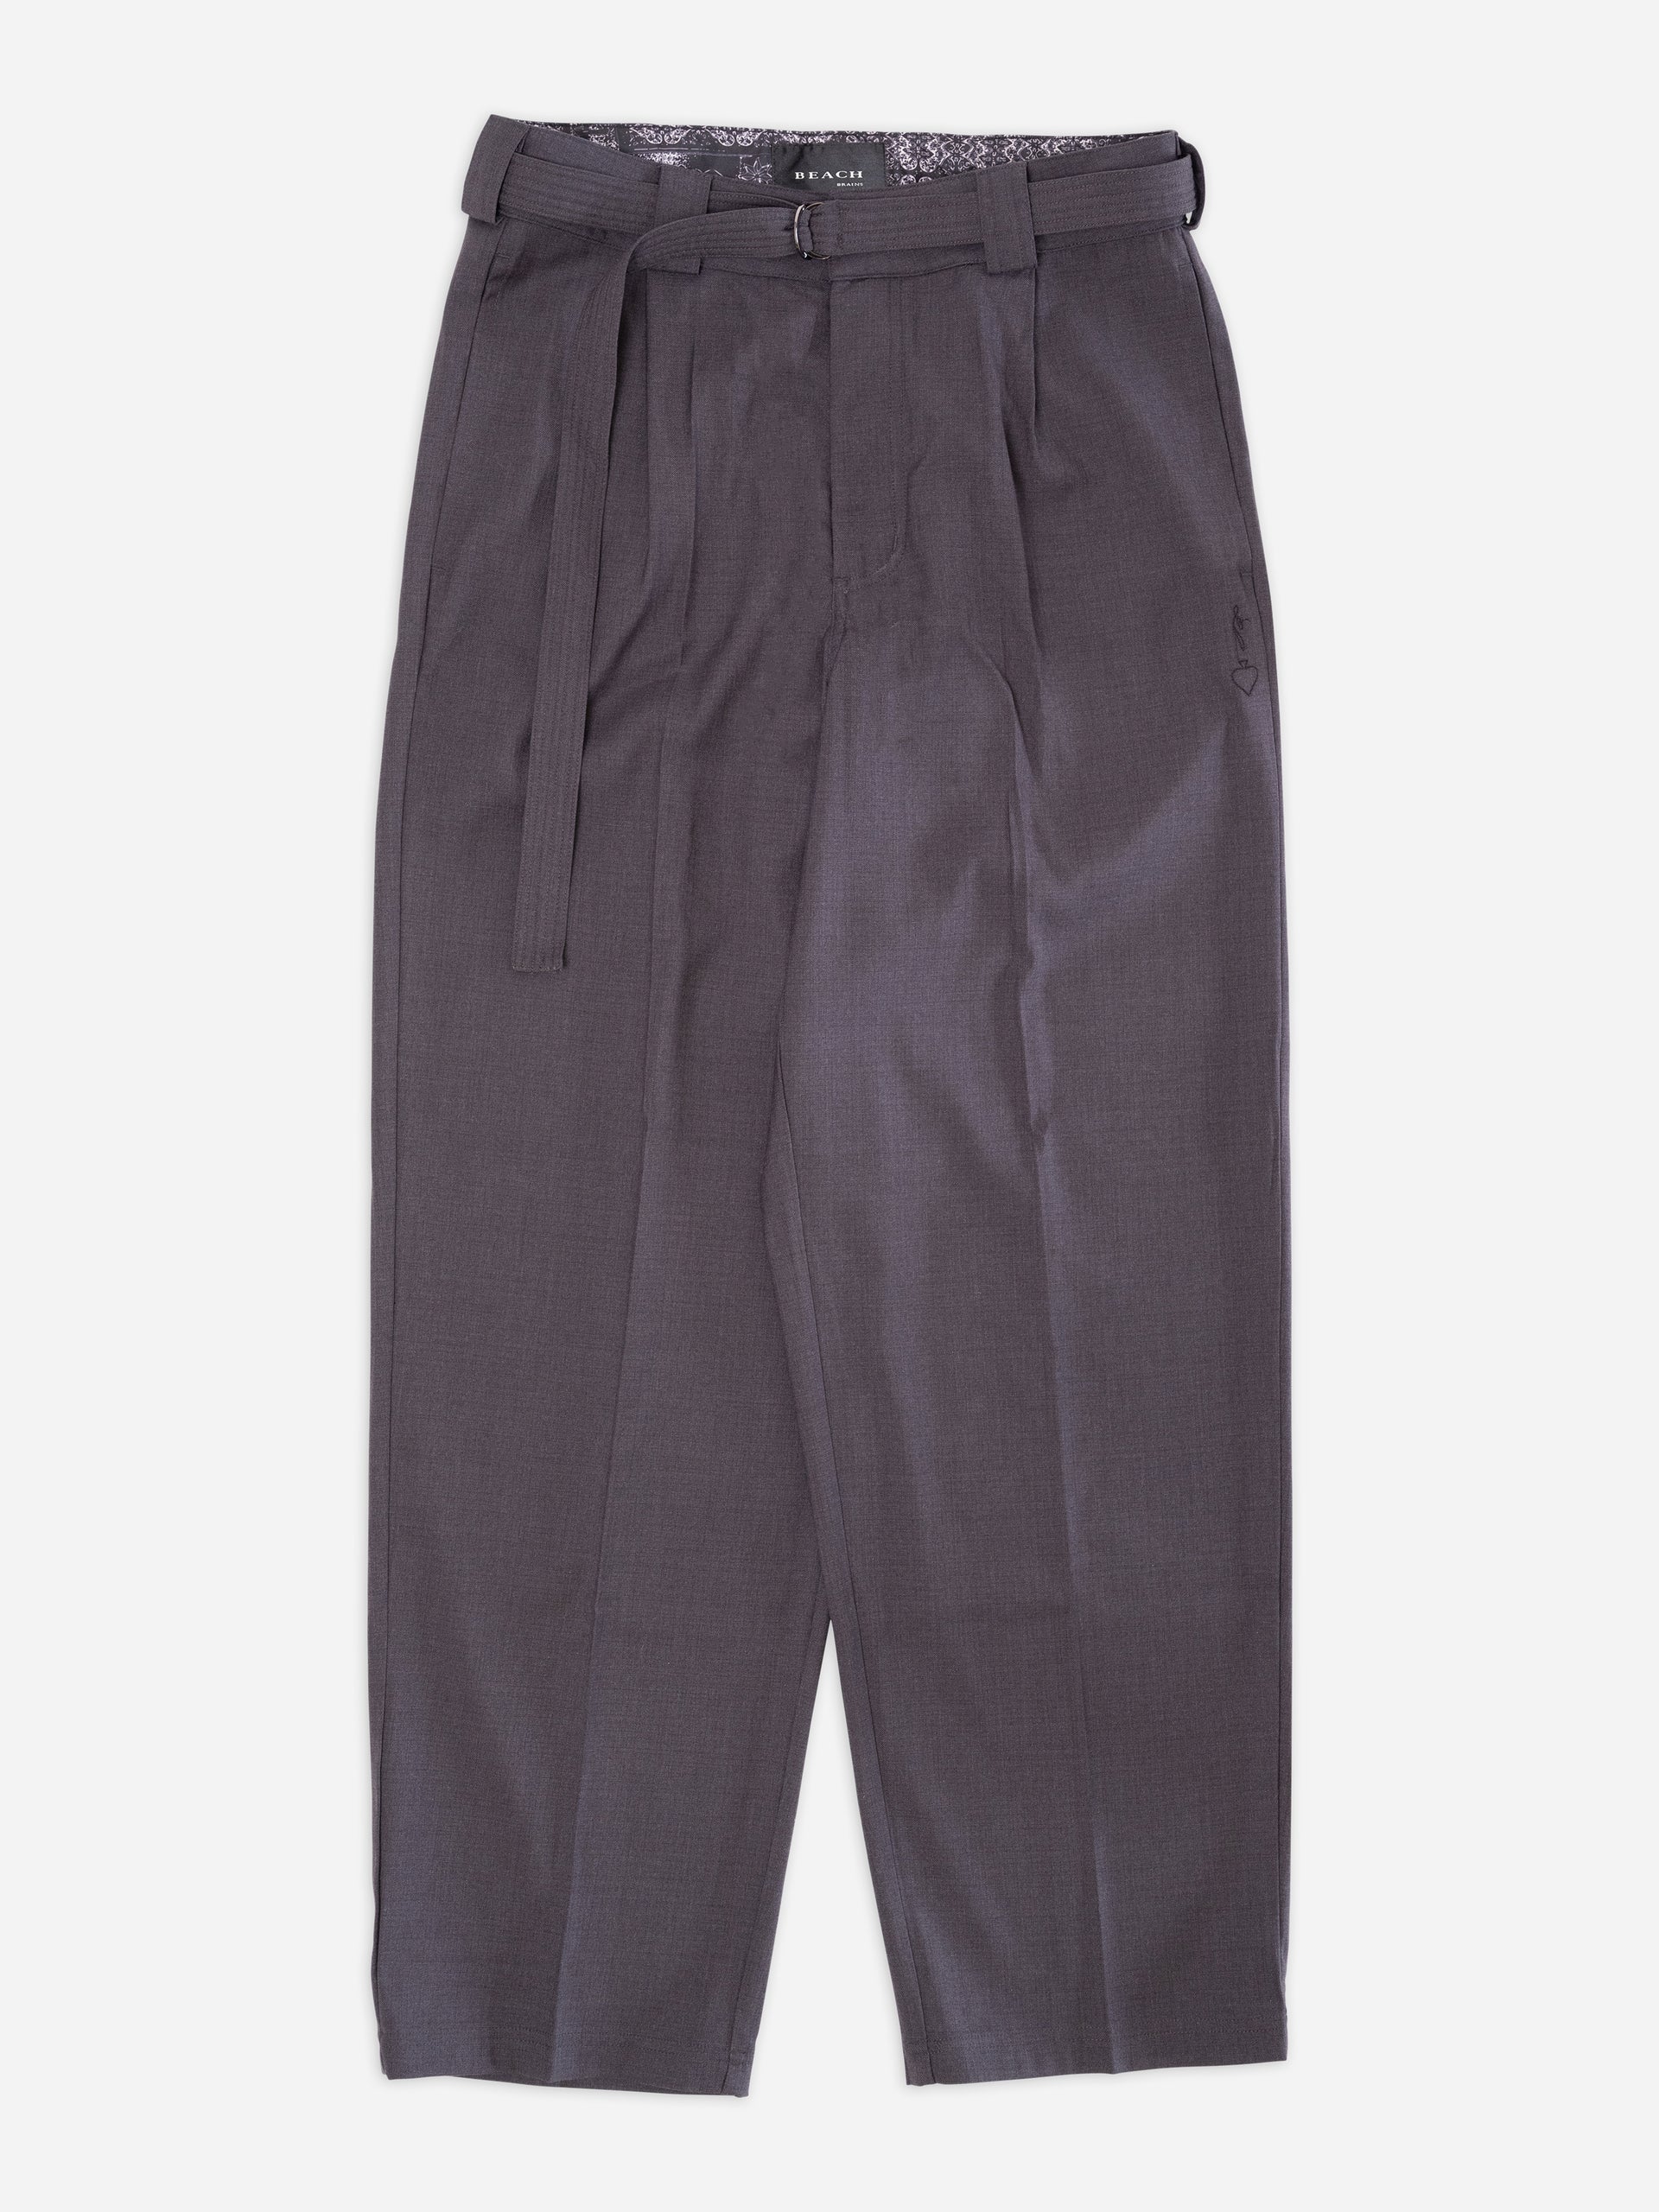 BEACH-BRAINS-Pleated-suit-Pant-Charcoal